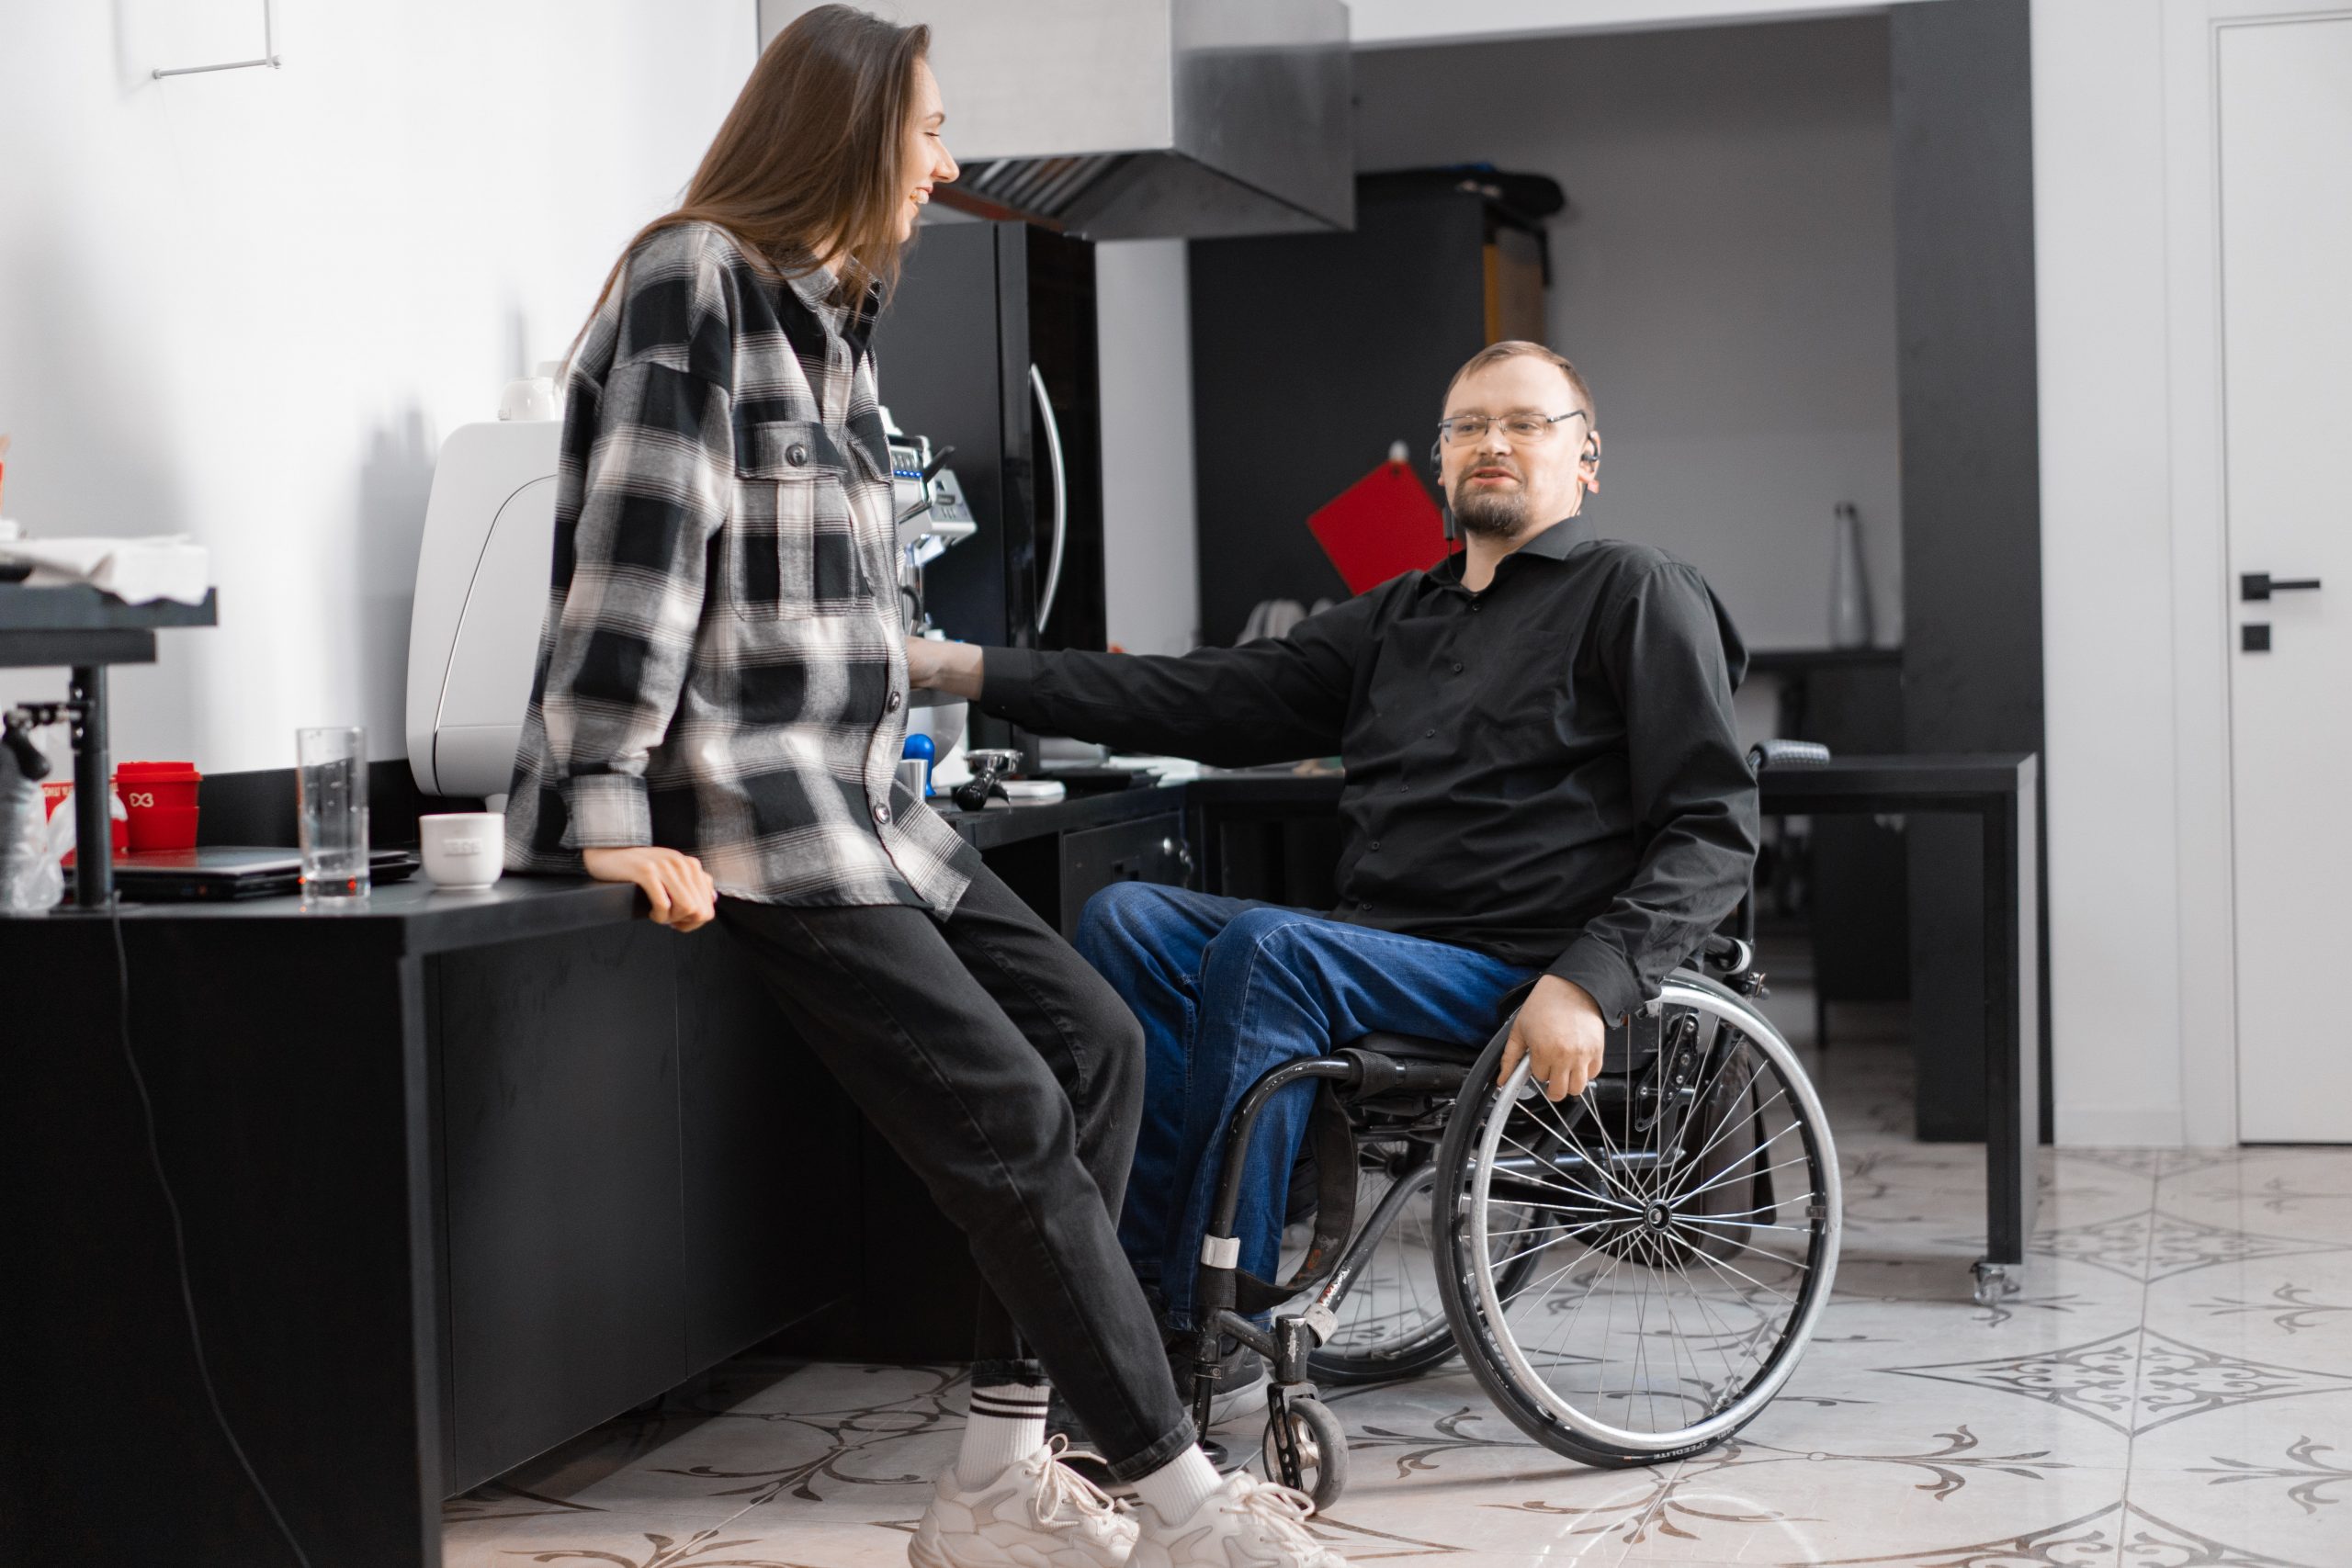 A woman leans against a cabinet while talking with a man in a wheelchair